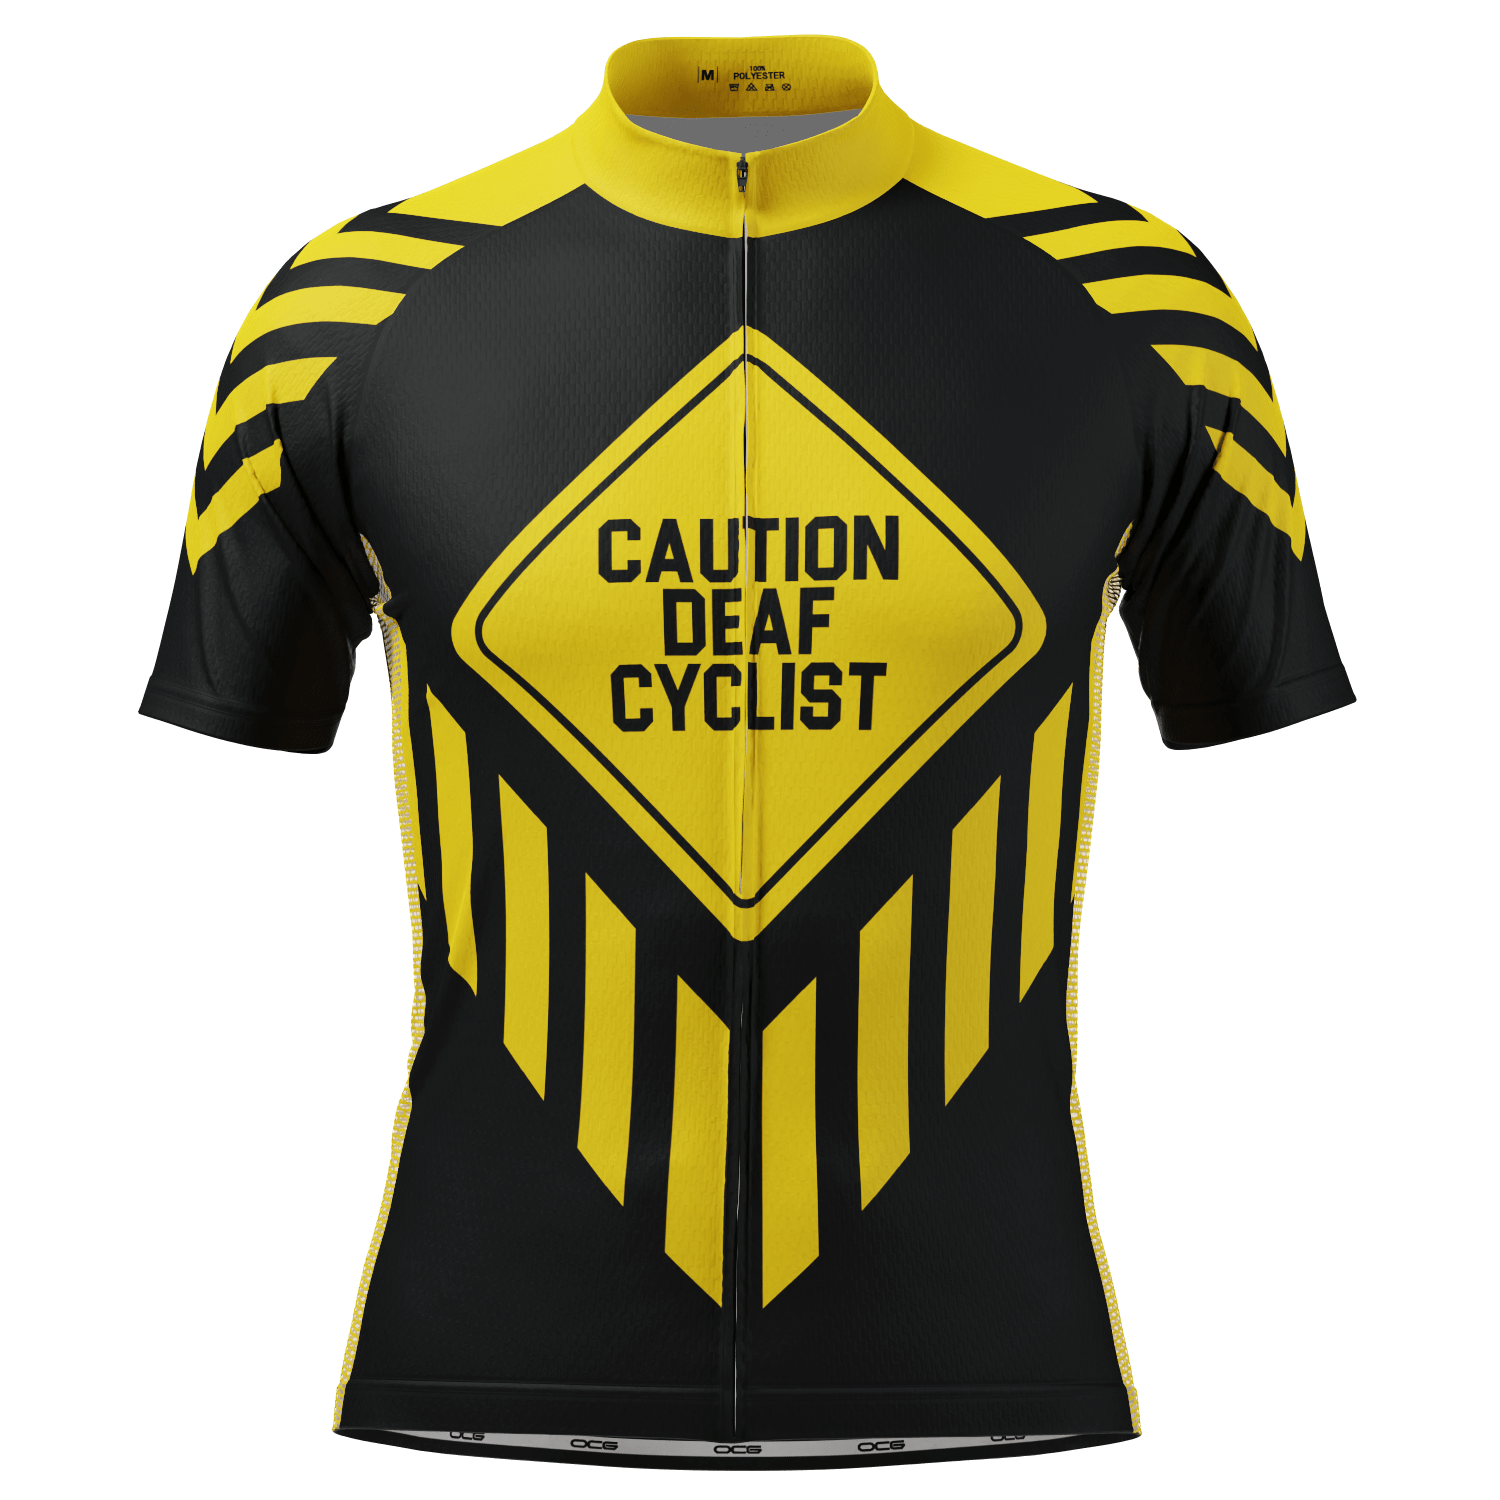 Men's Caution Deaf Cyclist Short Sleeve Cycling Jersey